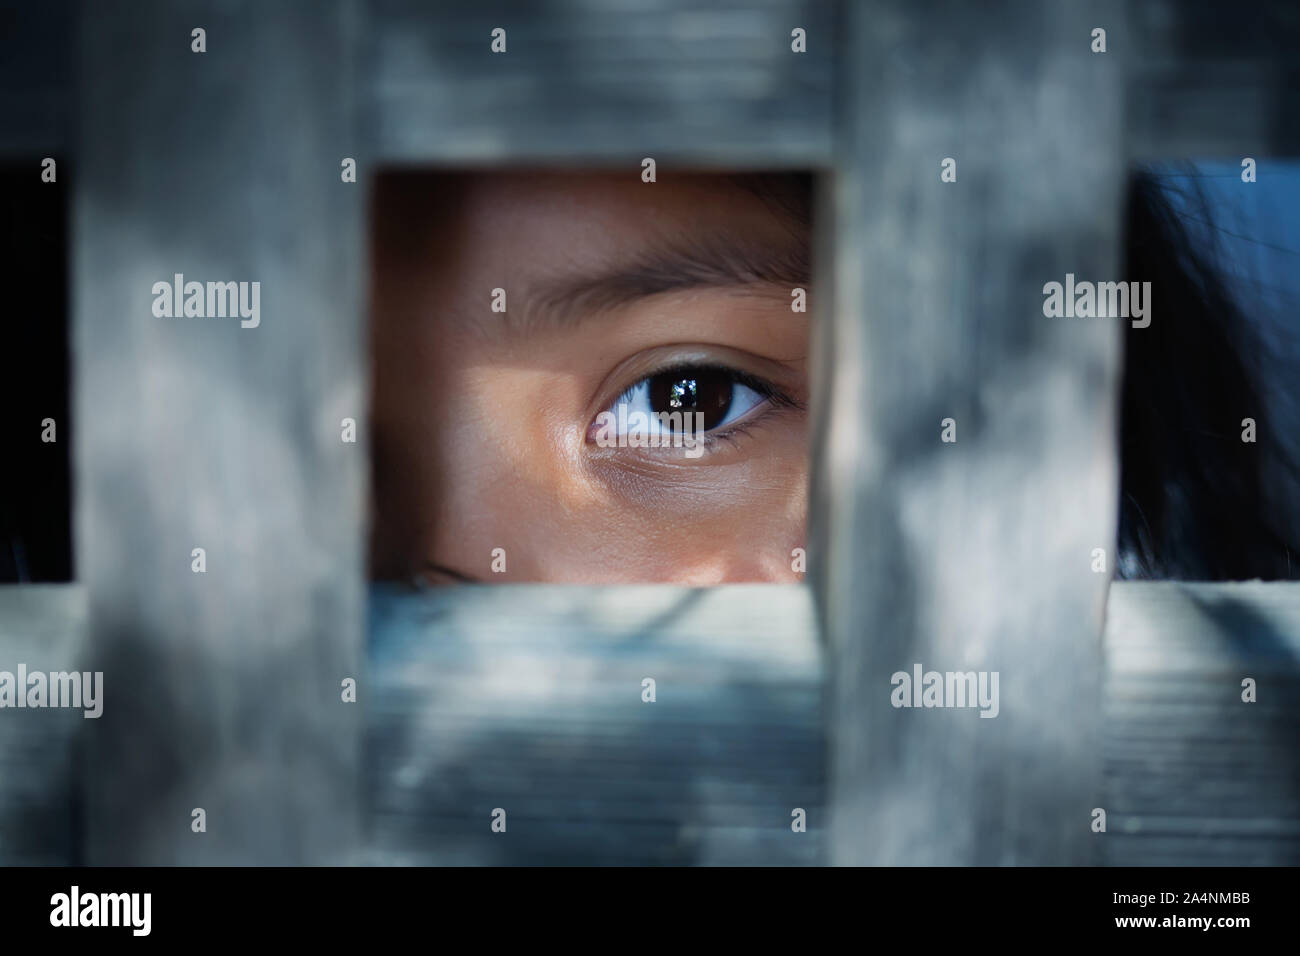 The blank stare of a child's eye who is standing behind what appears to be a wooden cage to convey captivity, or bondwoman. Stock Photo